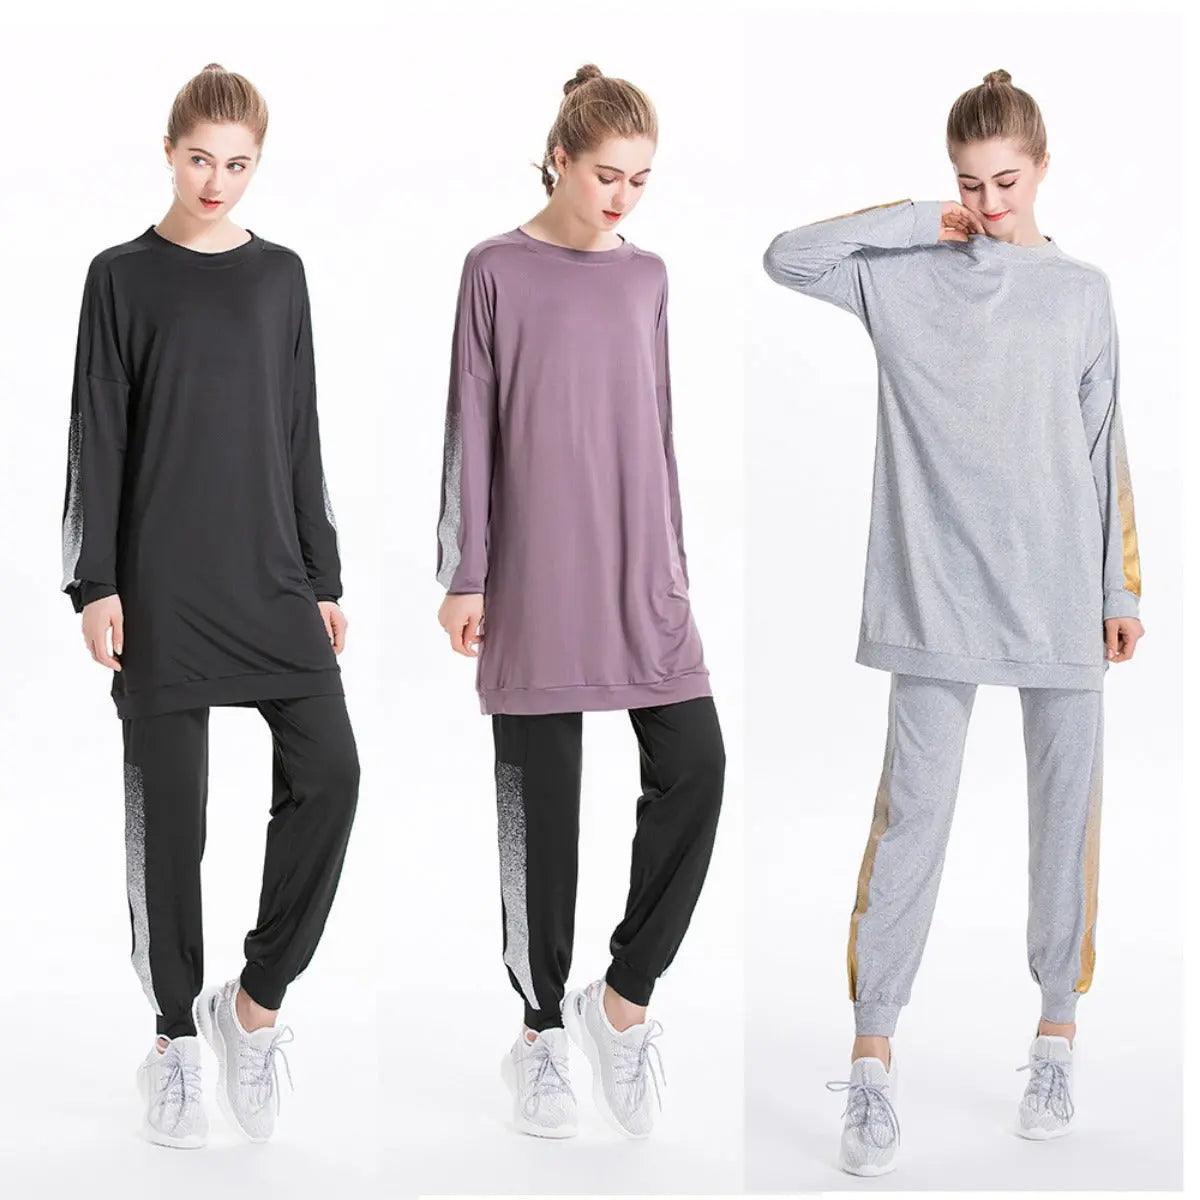 MB008 Two Piece Outfits Long Sleeve Crewneck Sweatsuit with Jogger Pants Mariam's Collection